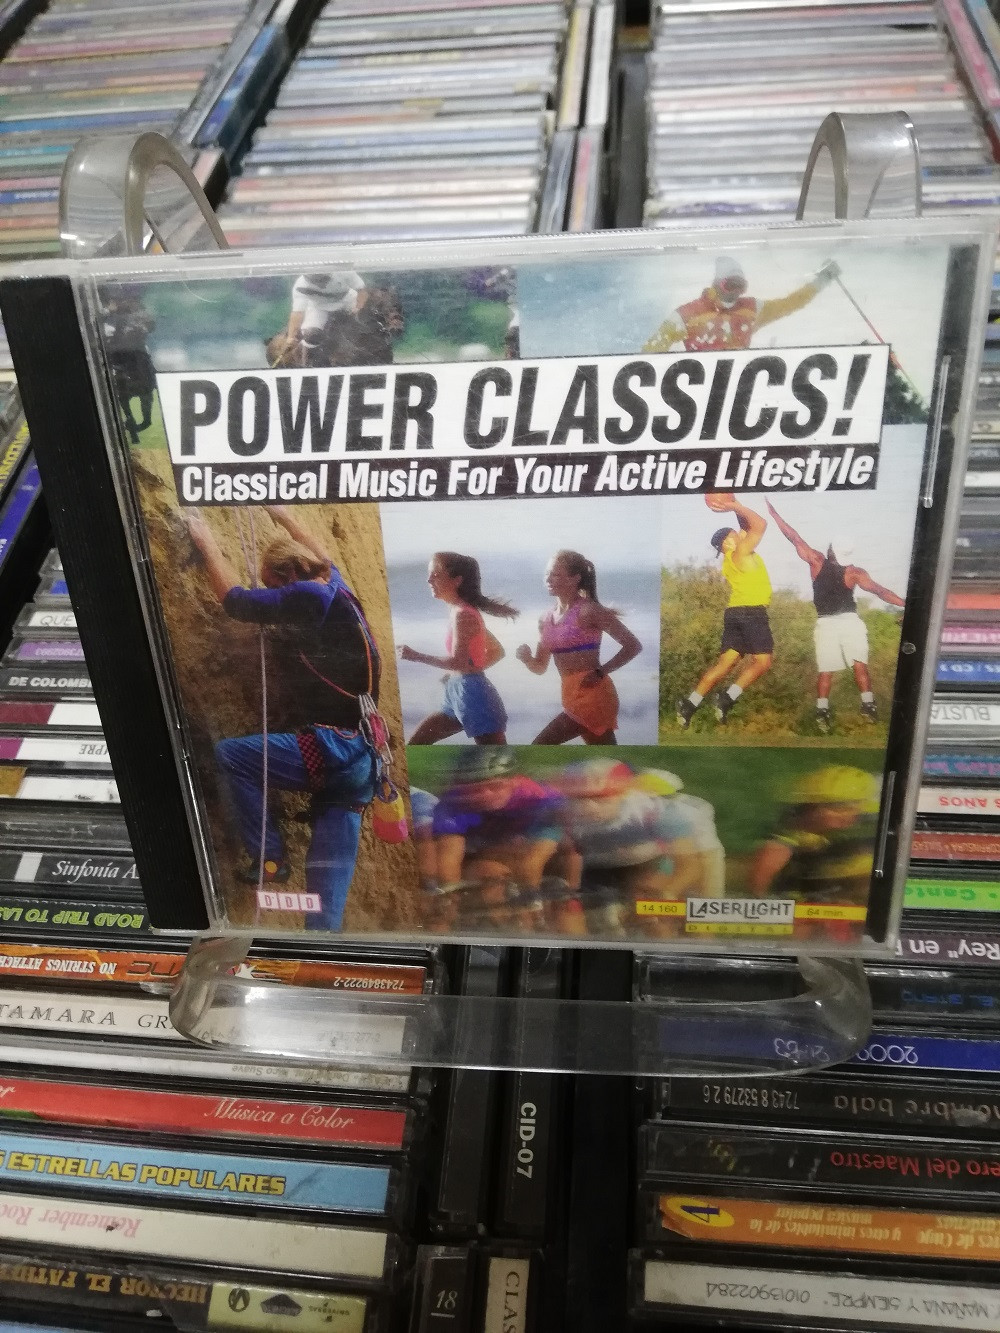 Imagen CD POWER CLASSICS! - CLASSICAL MUSCI FOR YOUR ACTIVE LIFESTYLE